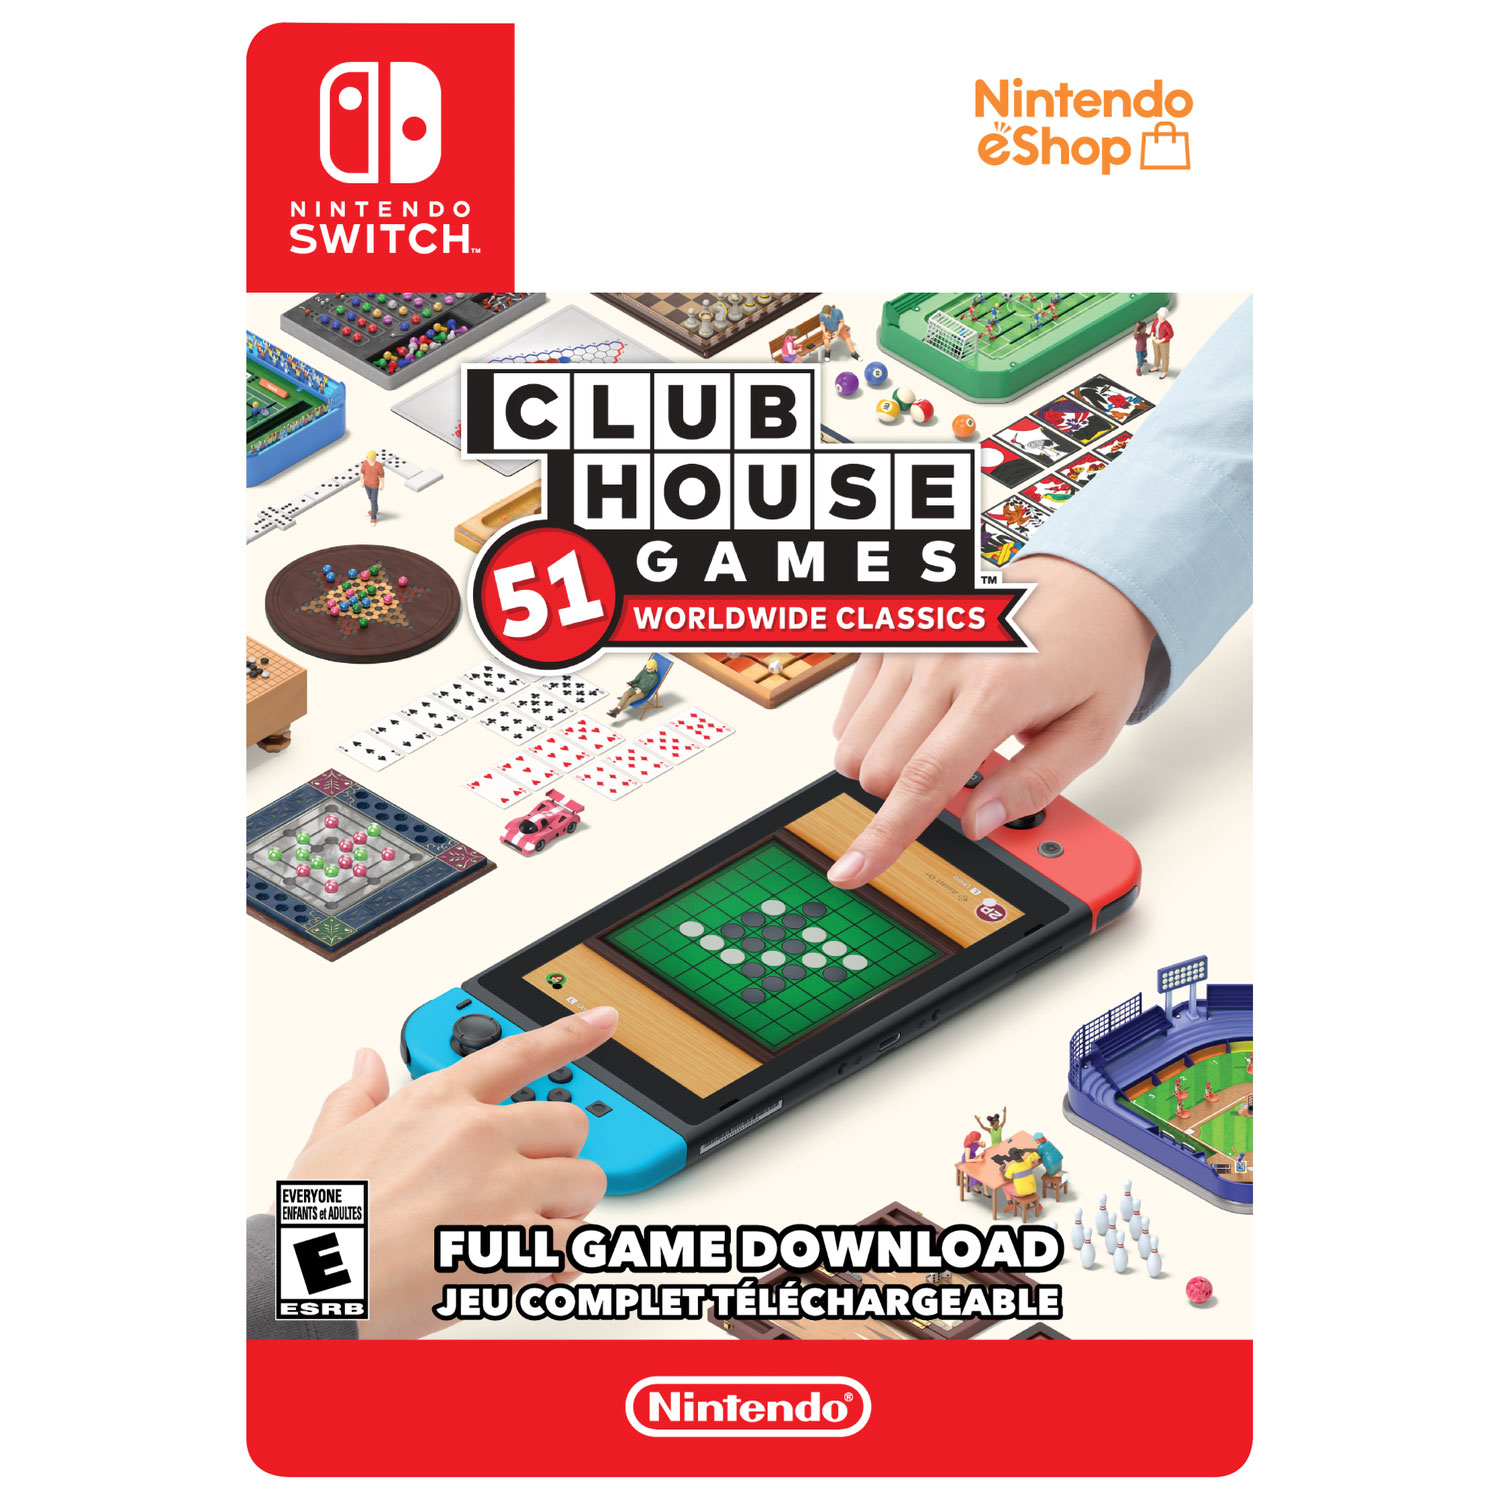 51 tabletop games switch